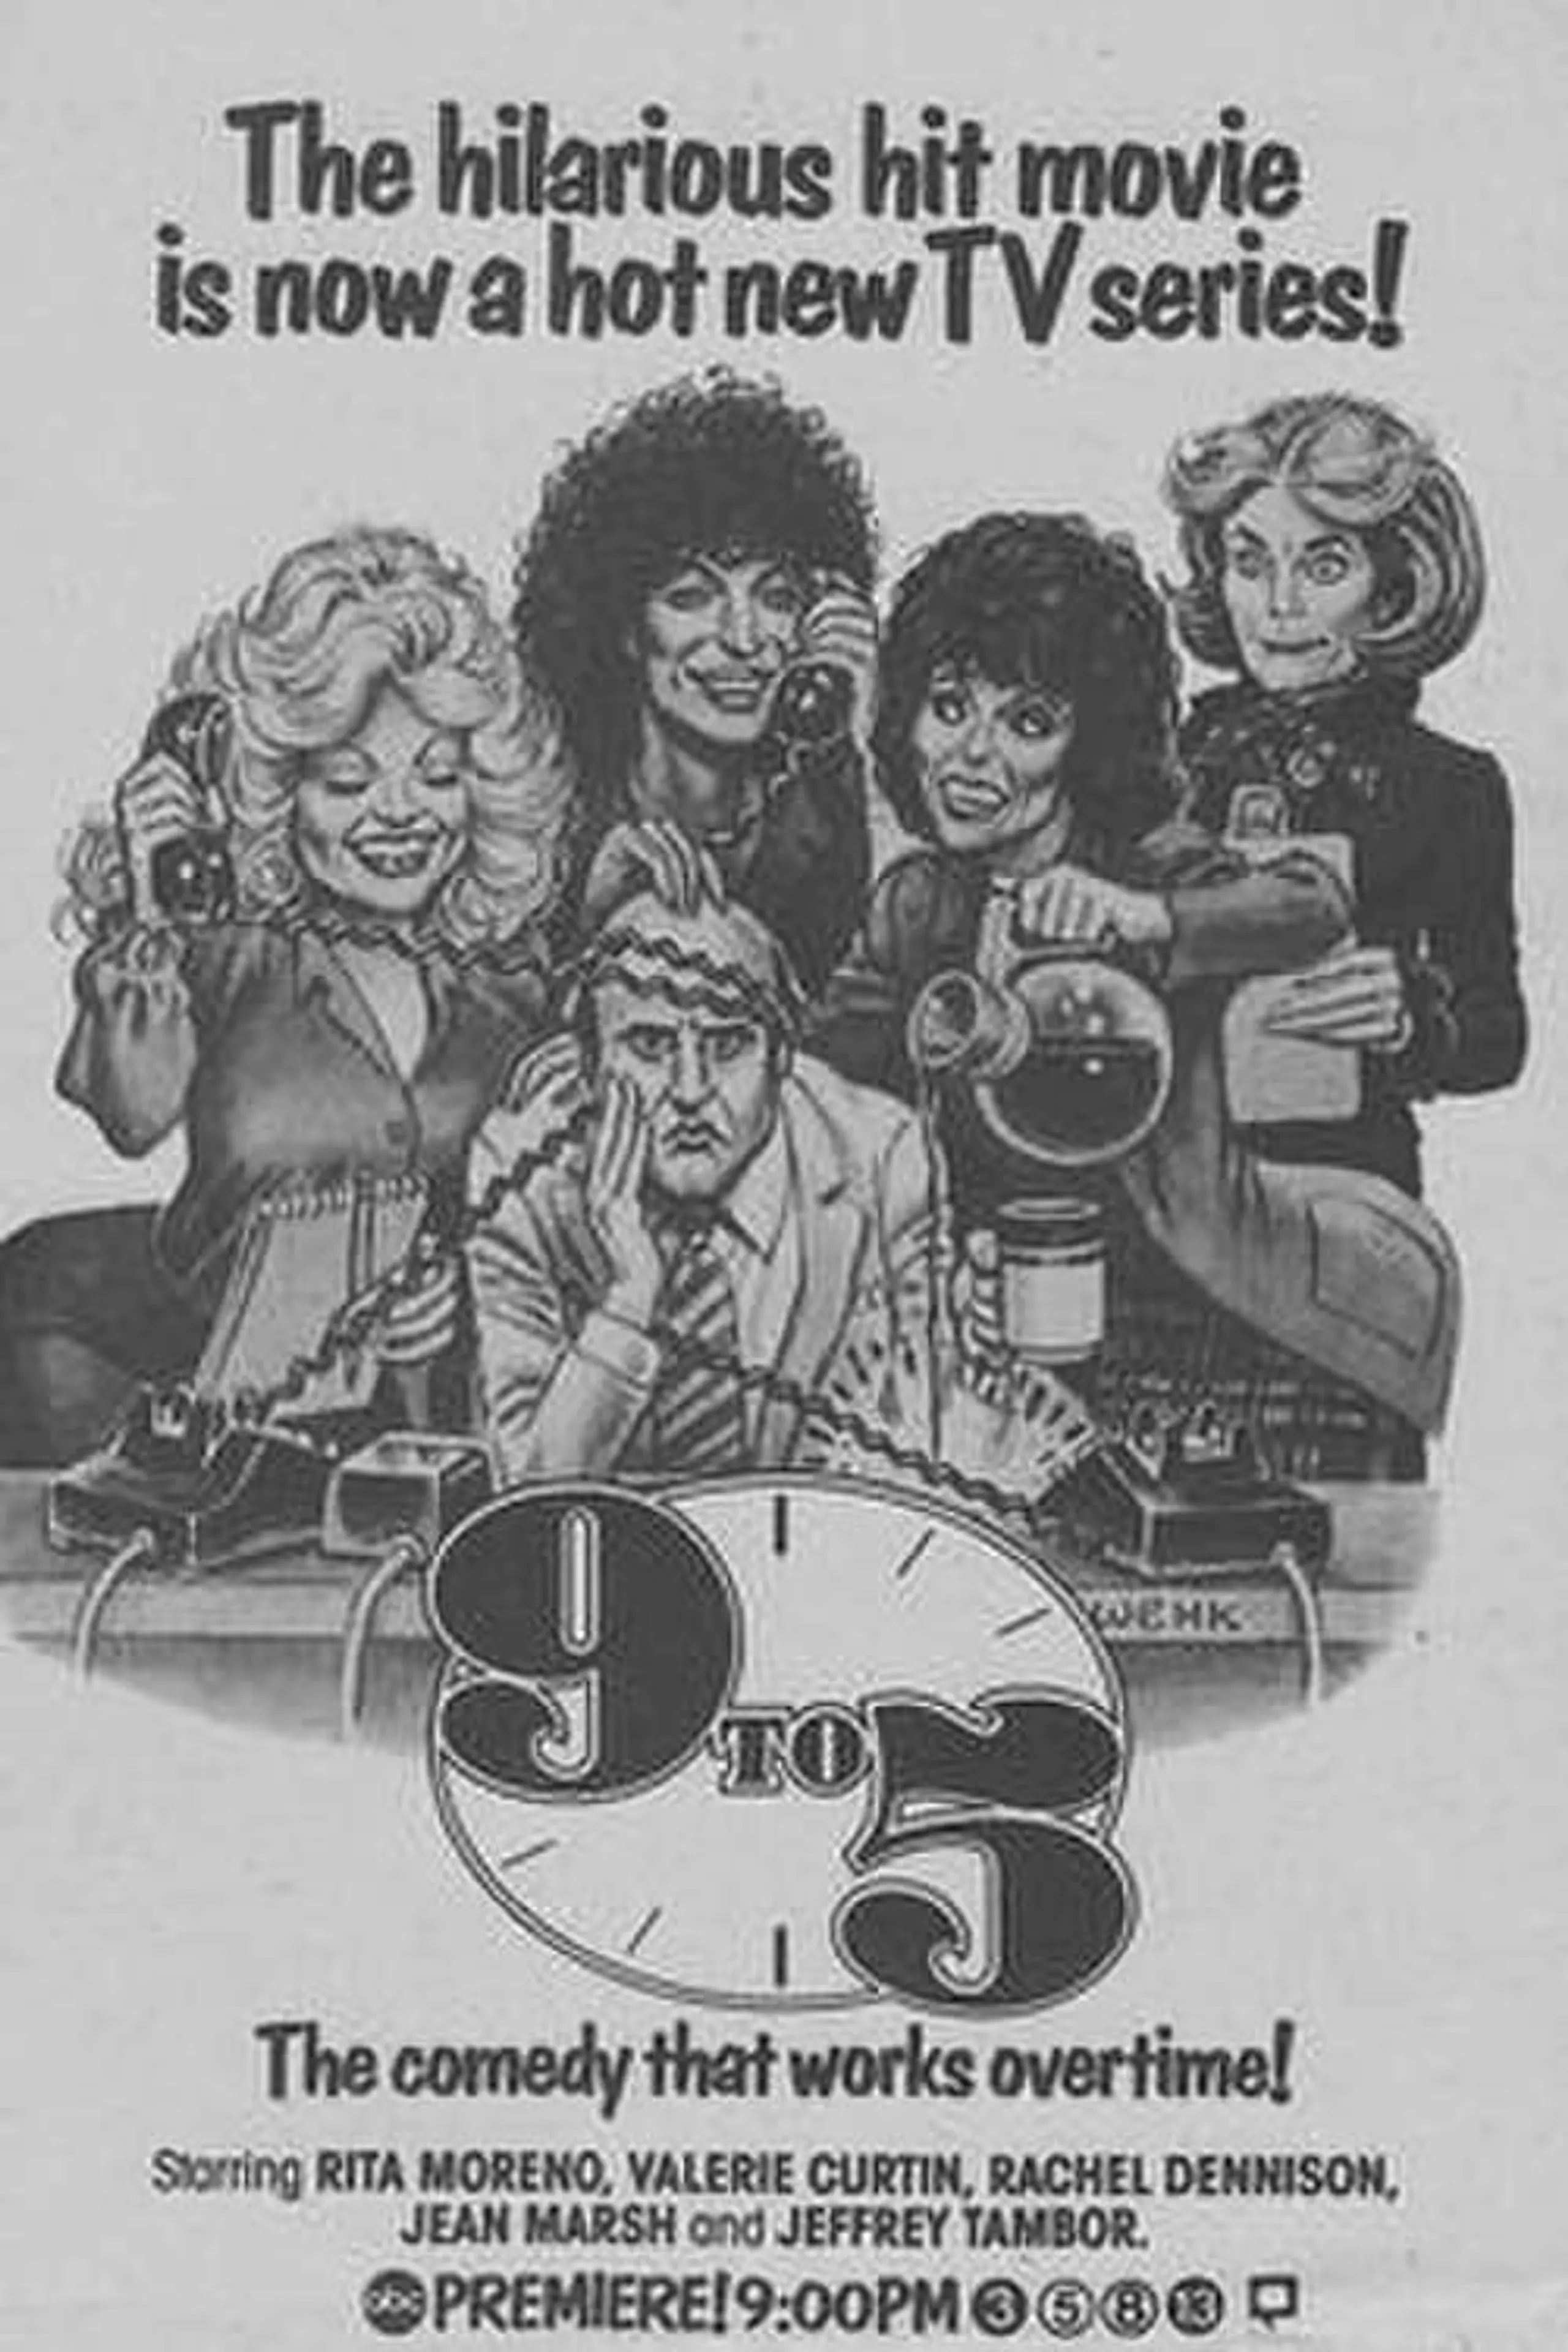 9 to 5